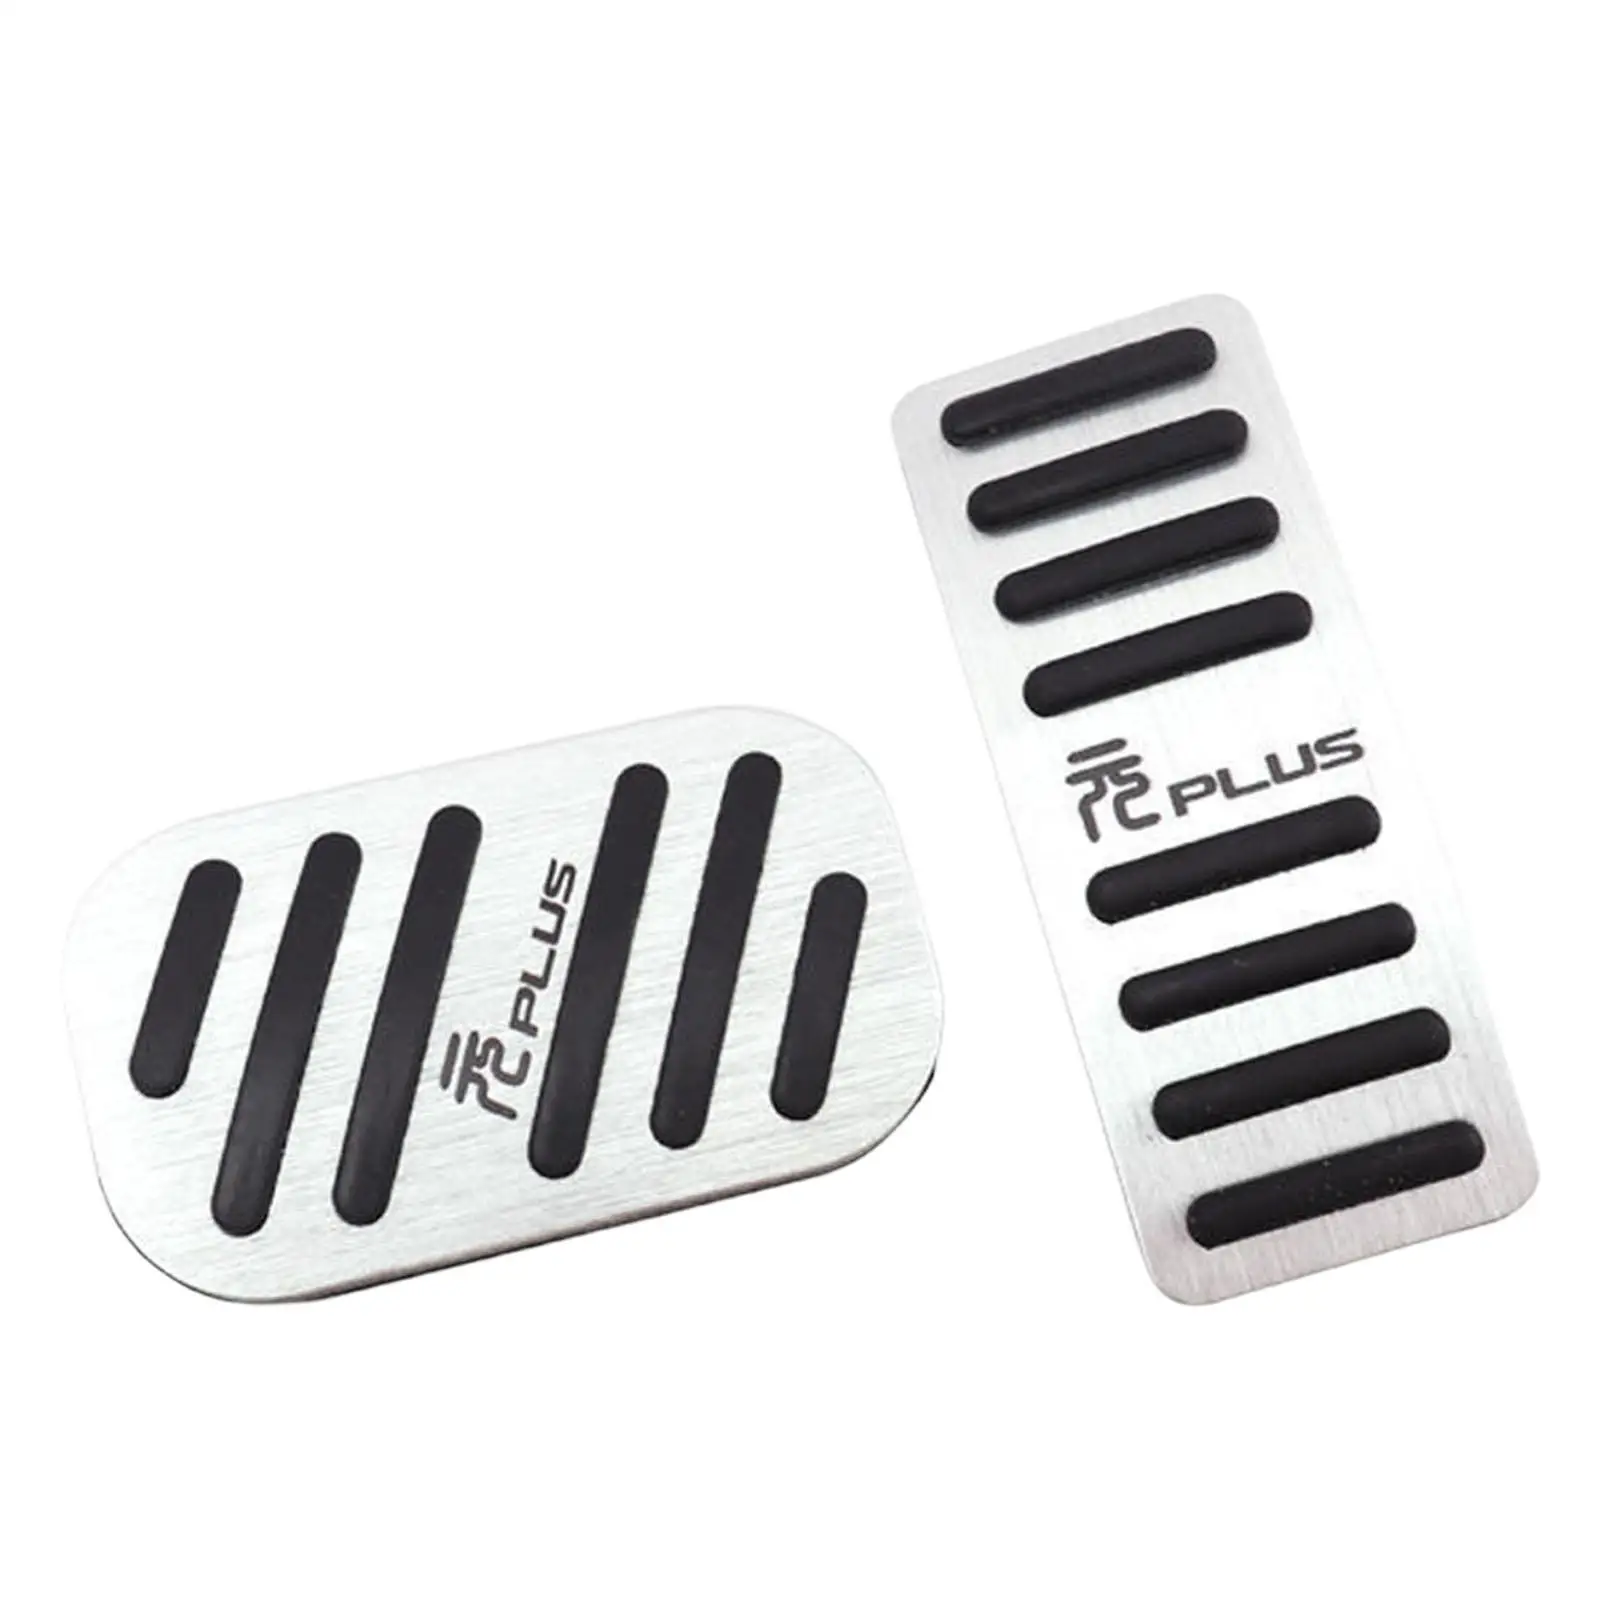 Gas Brake Pedal Cover Set Foot Pedals Pads for Byd Atto 3 Yuan Plus Direct Replaces Spare Parts Car Accessories Durable